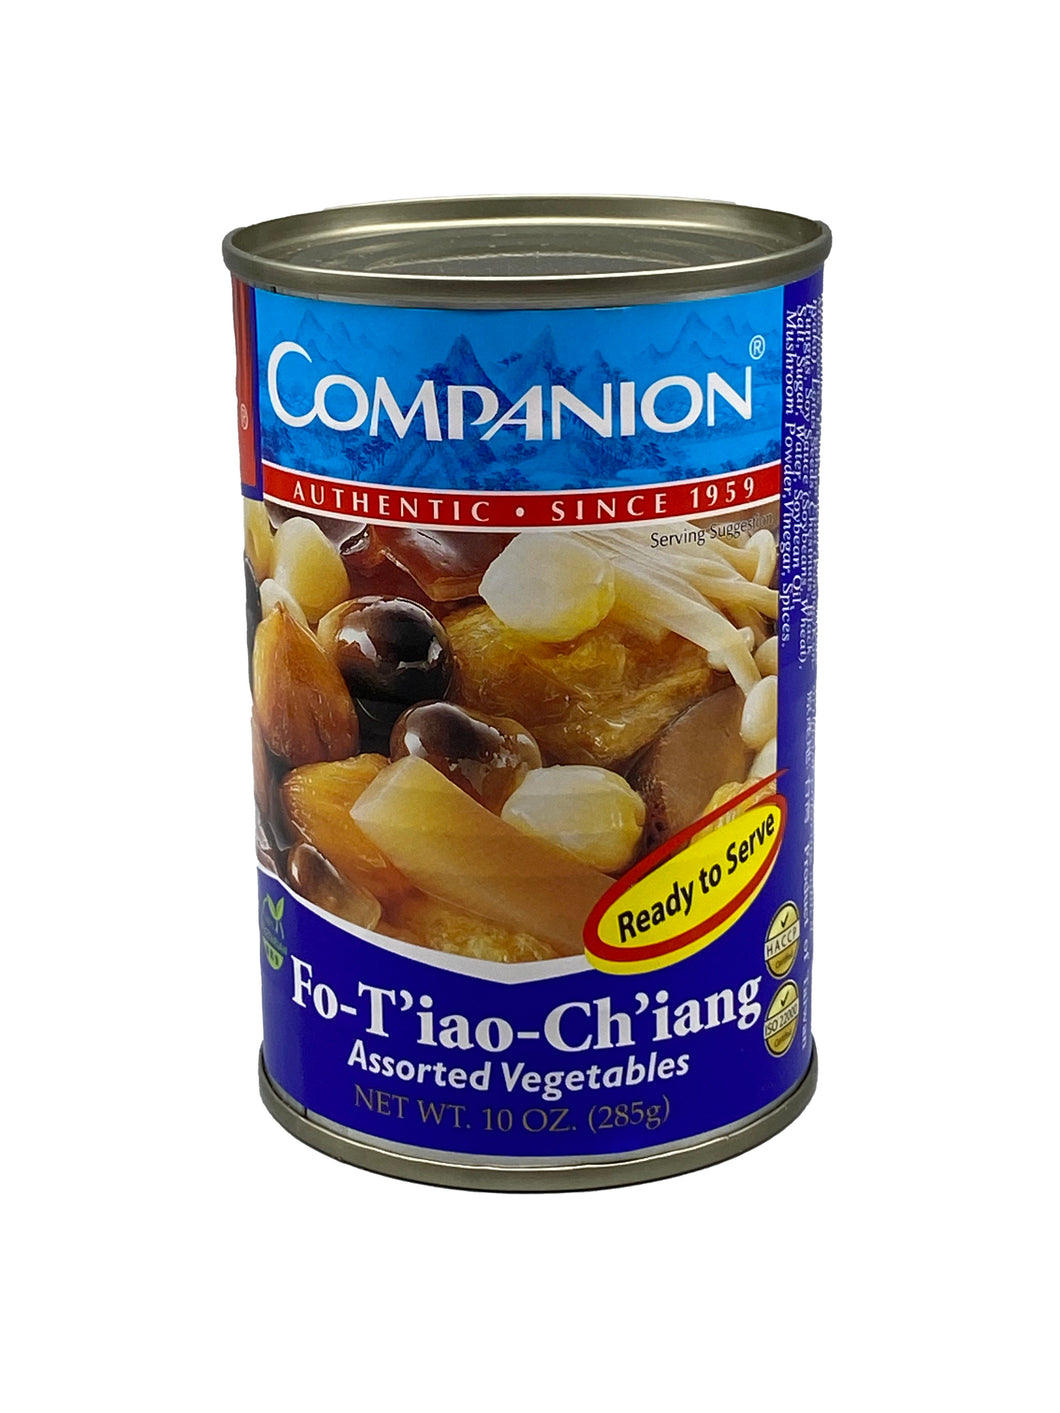 Companion Fo-Tiao-Chiang Assorted Vegetables